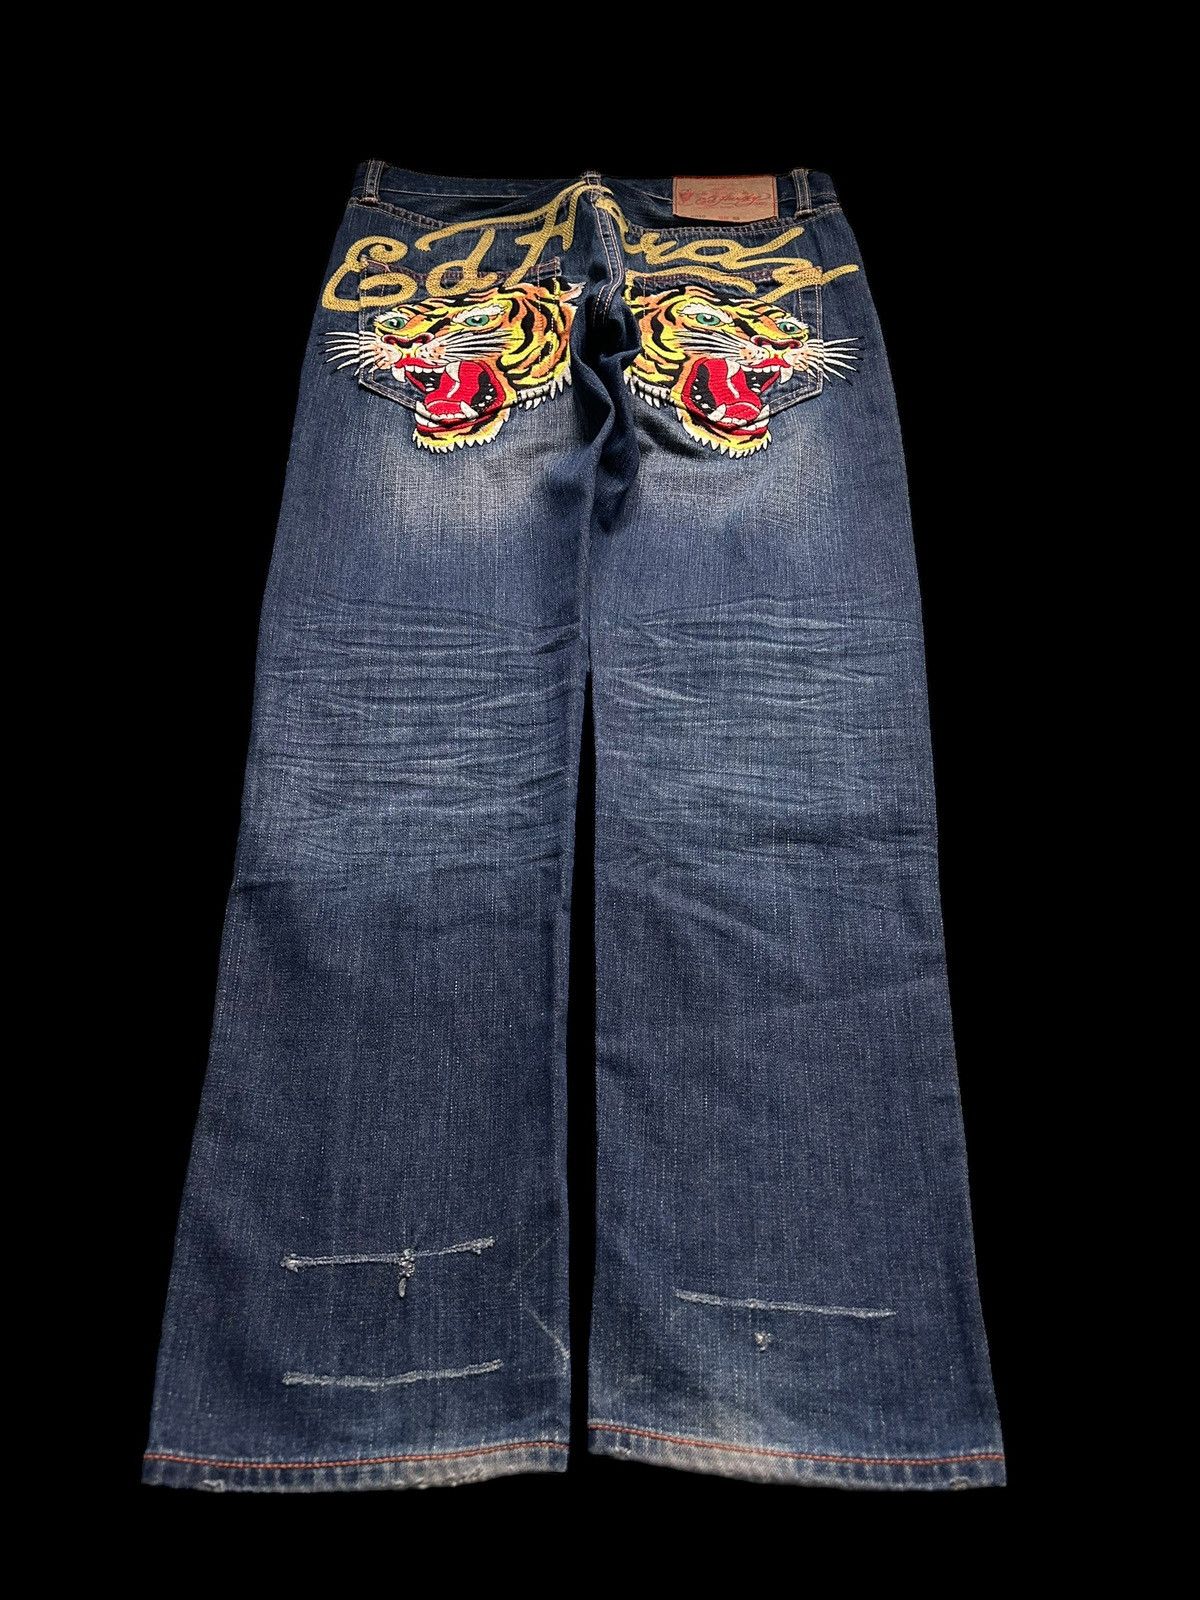 Pre-owned Christian Audigier X Ed Hardy Vintage Baggy Denim Jeans Ed Hardy Big Logo Embroidered Y2k In Navy